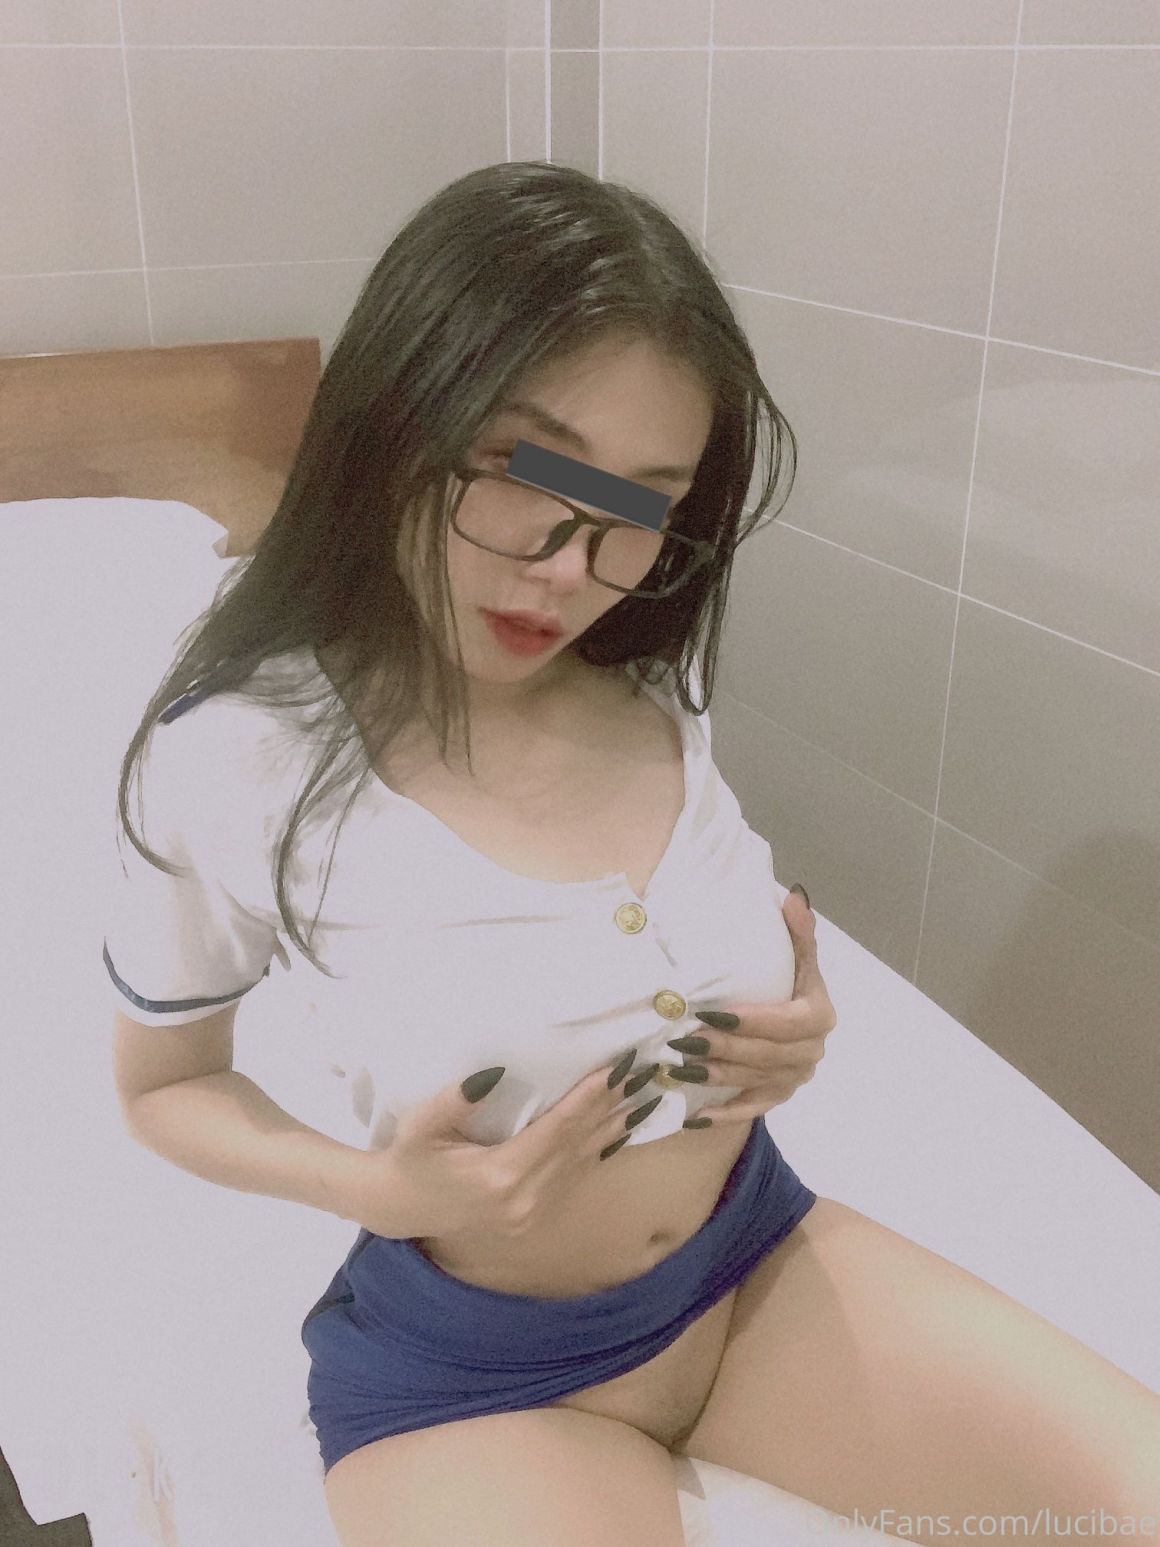 AsianOnlyfans 08 313 20210909